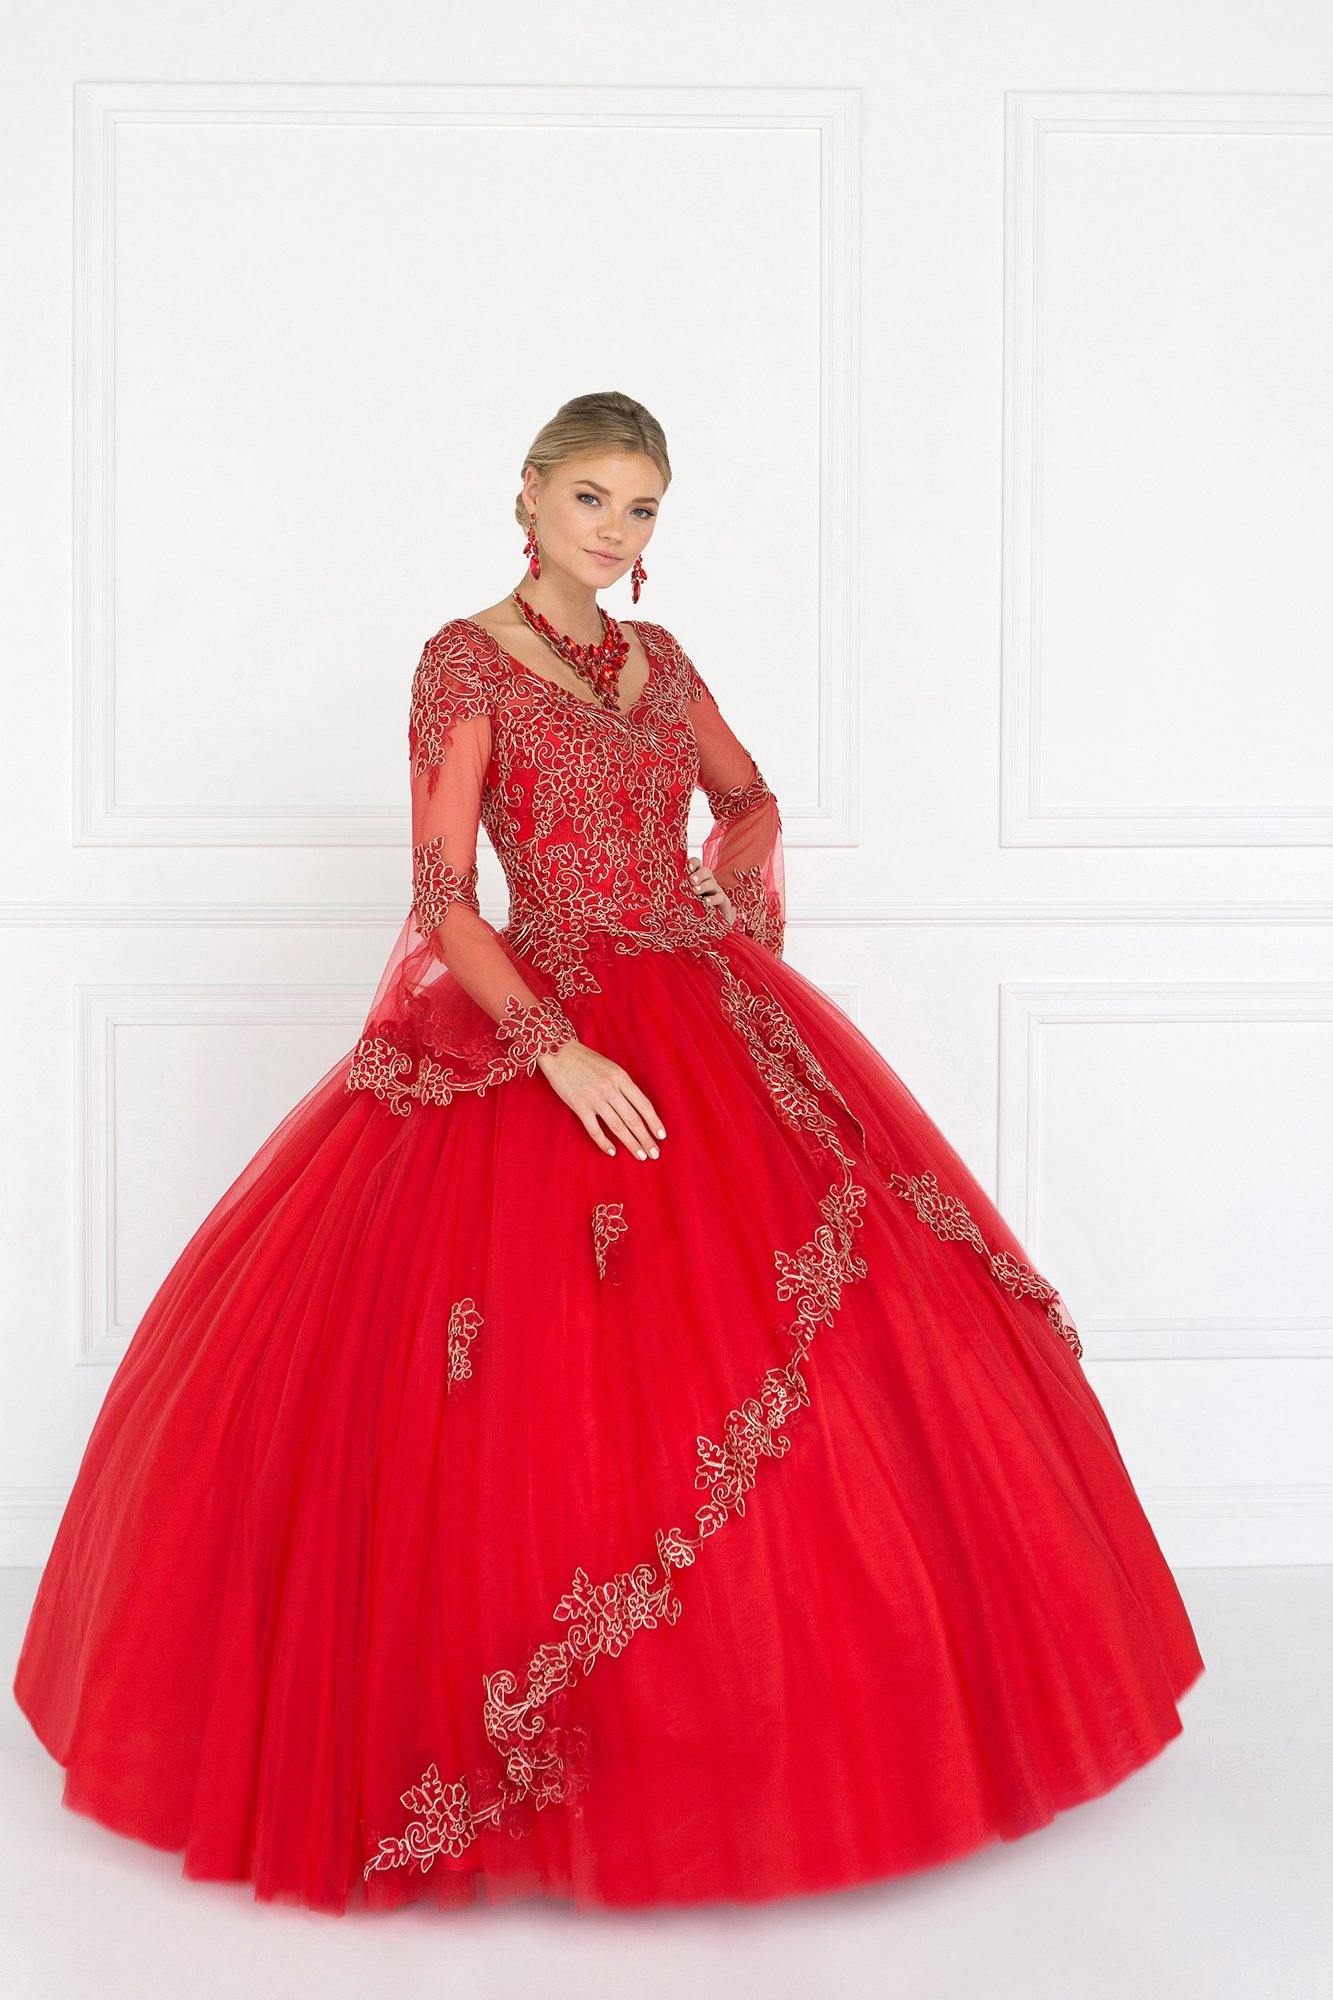 Quinceanera V-Neck Ball Gown Dress with Bell Sleeves - The Dress Outlet Elizabeth K